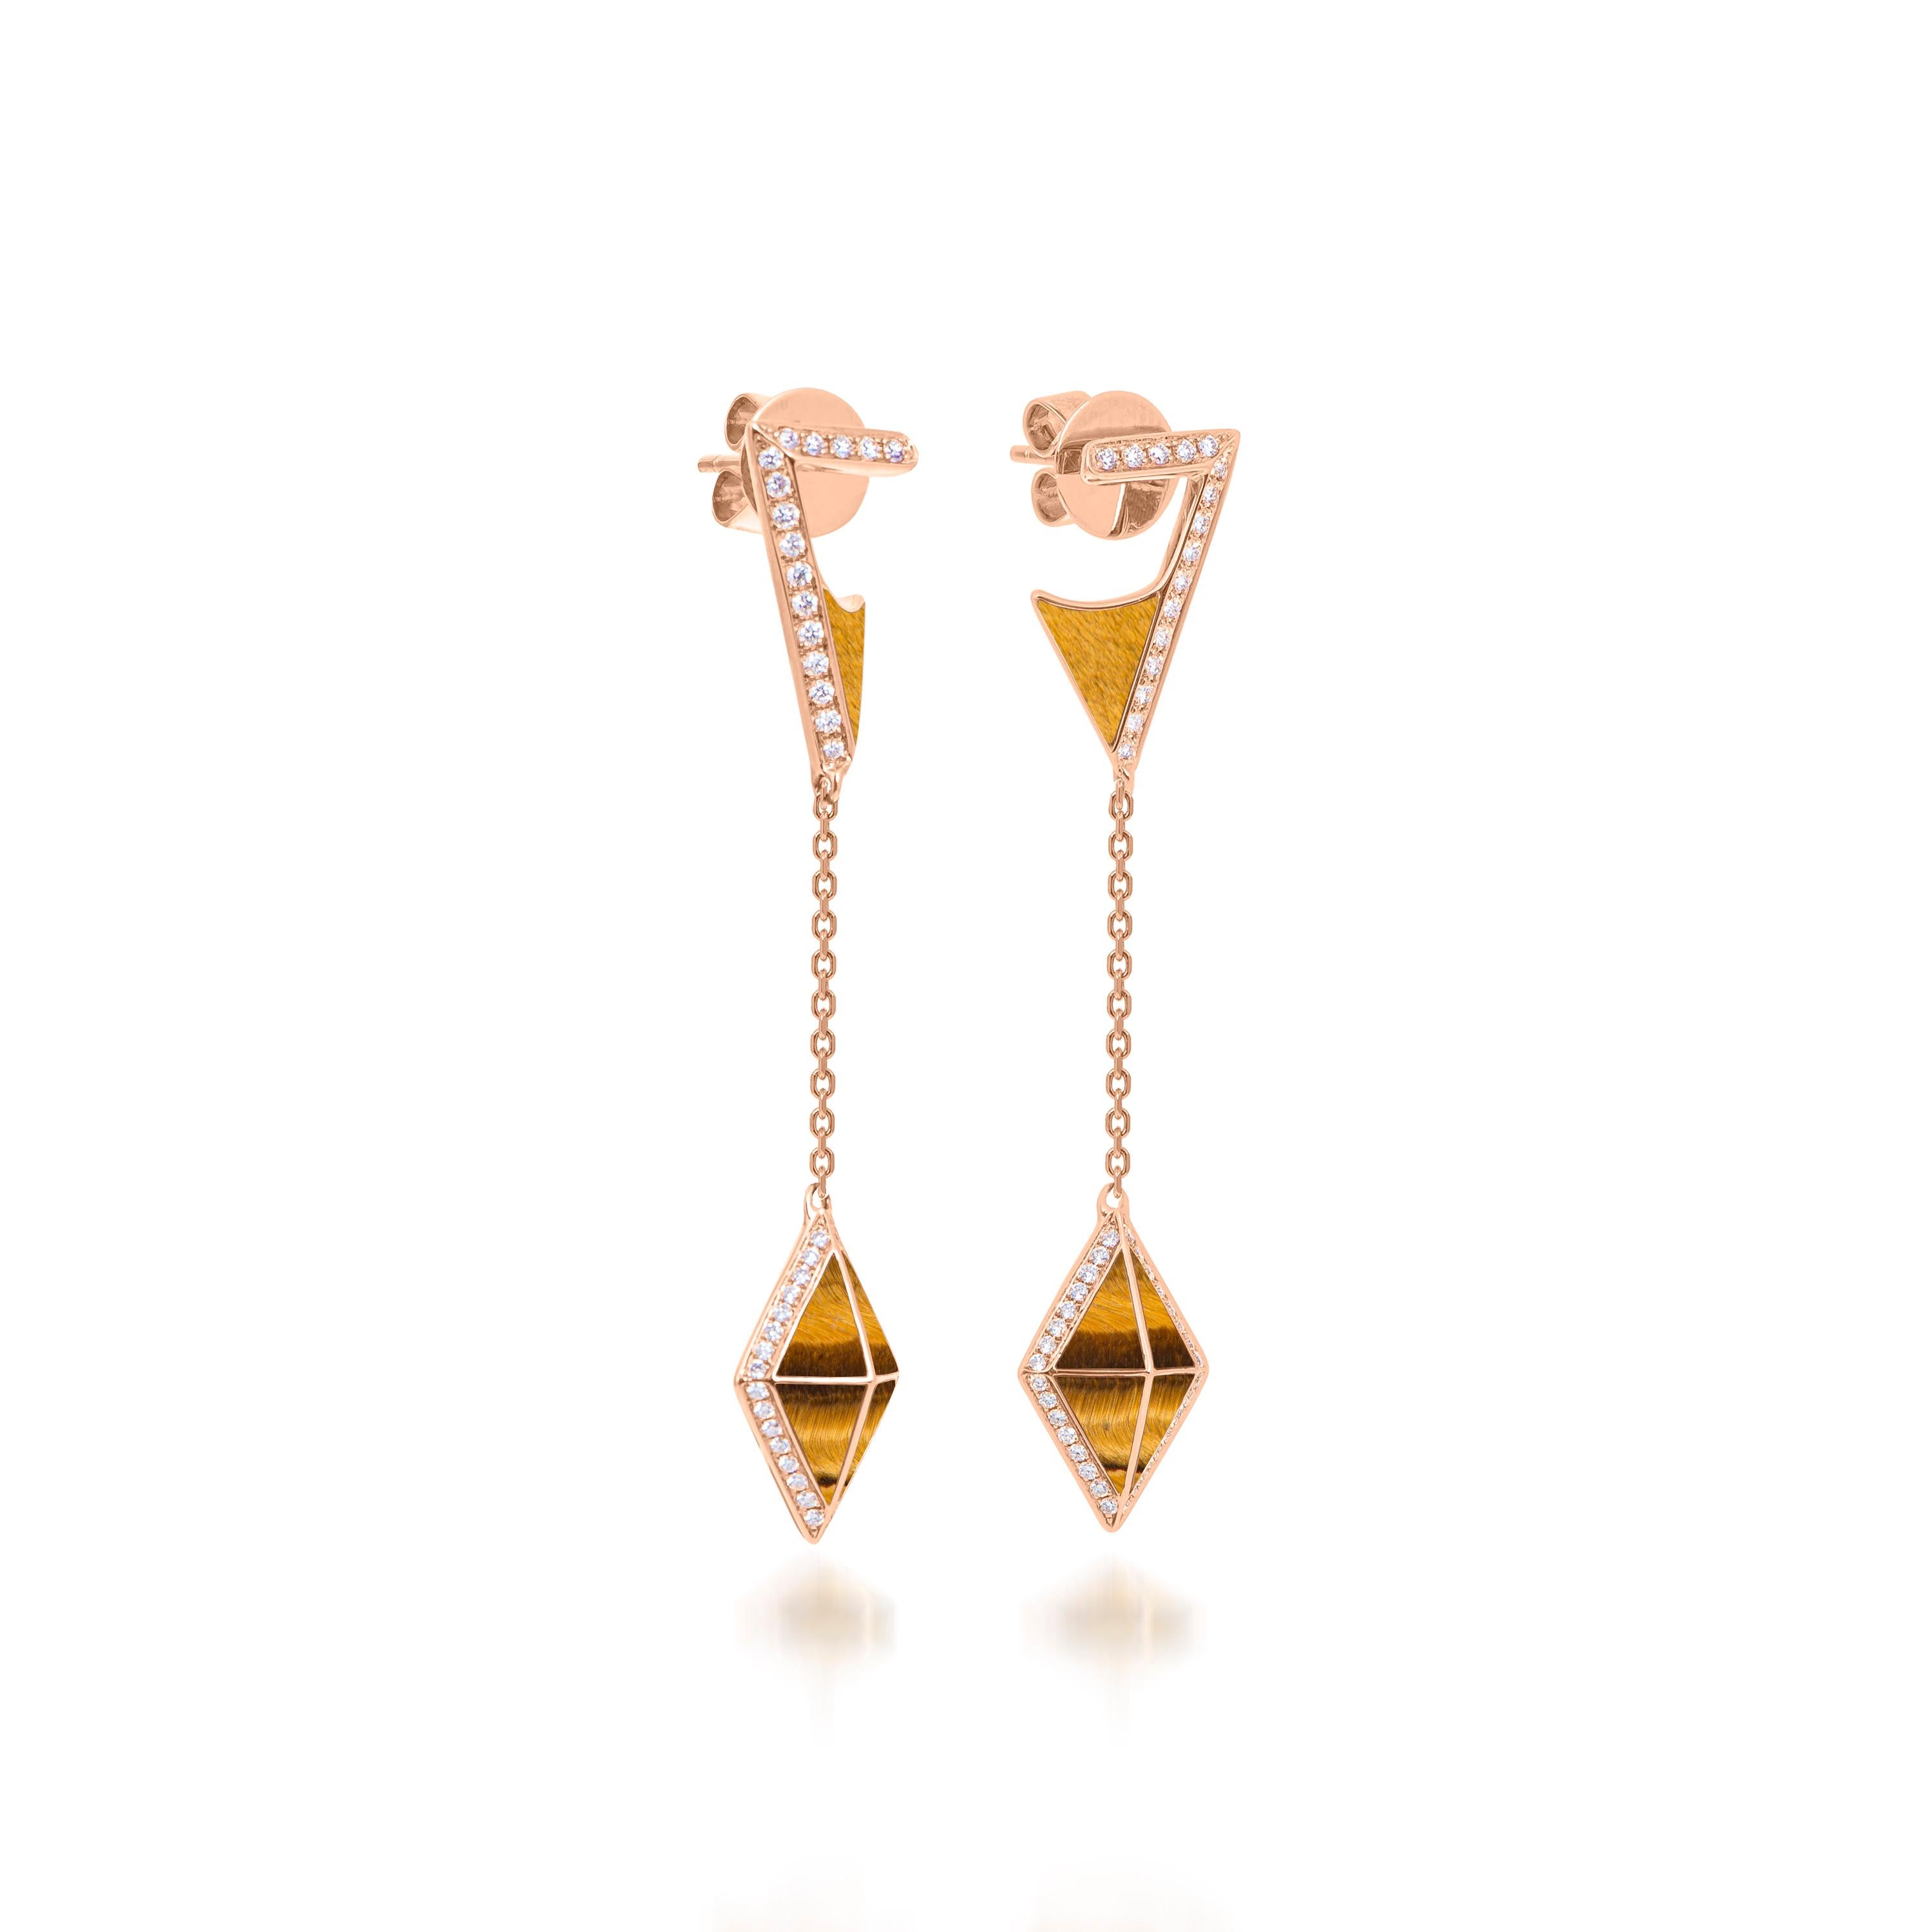 Through graphic, contemporary lines, Butani’s Tetra collection celebrates the beauty of symmetry while reimagining classic motifs of the past. 

Flowing from the ear towards the shoulders with finesse, these graceful drop earrings celebrate the